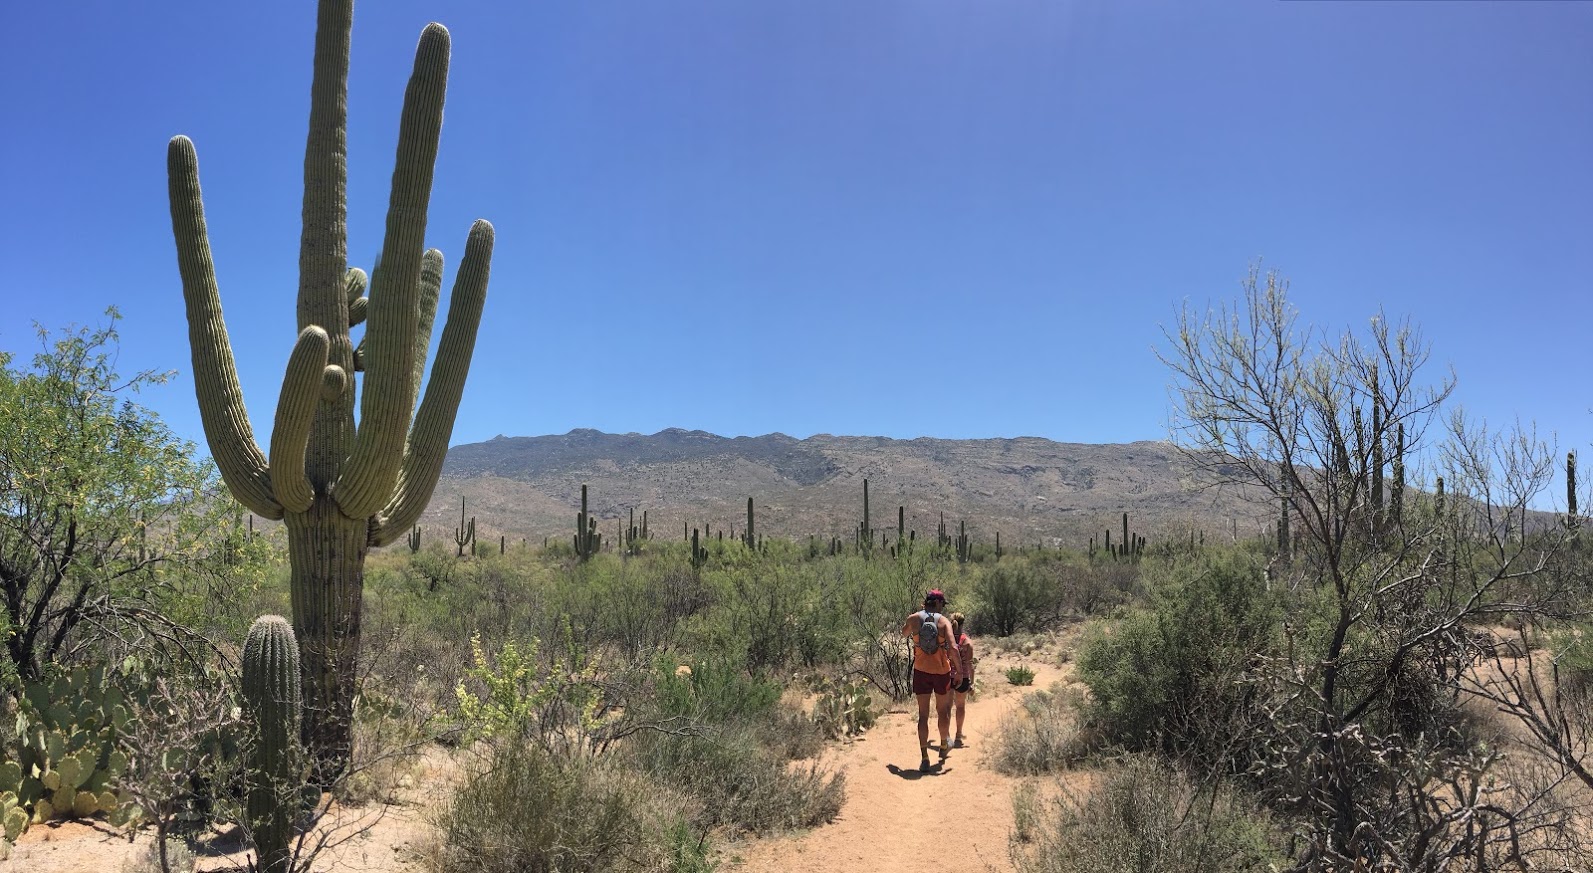 Giant cacti in Sagauro National Park, one of the stops on the Arizona National Park road trip.